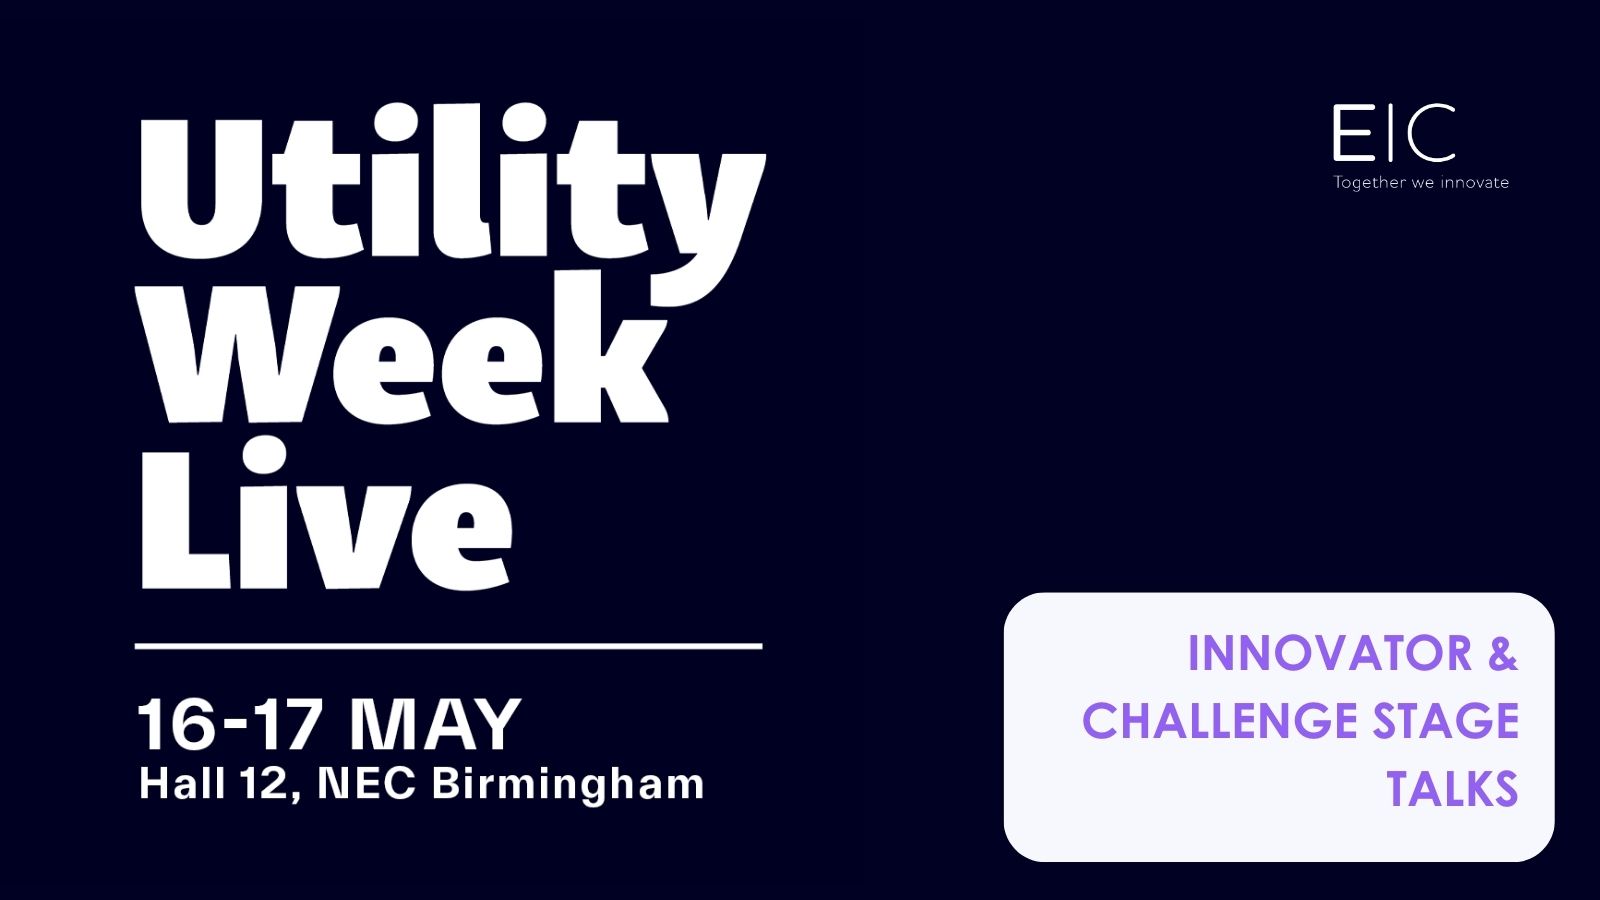 Utility Week Live: join the discussions on the Challenge and Innovator Stage